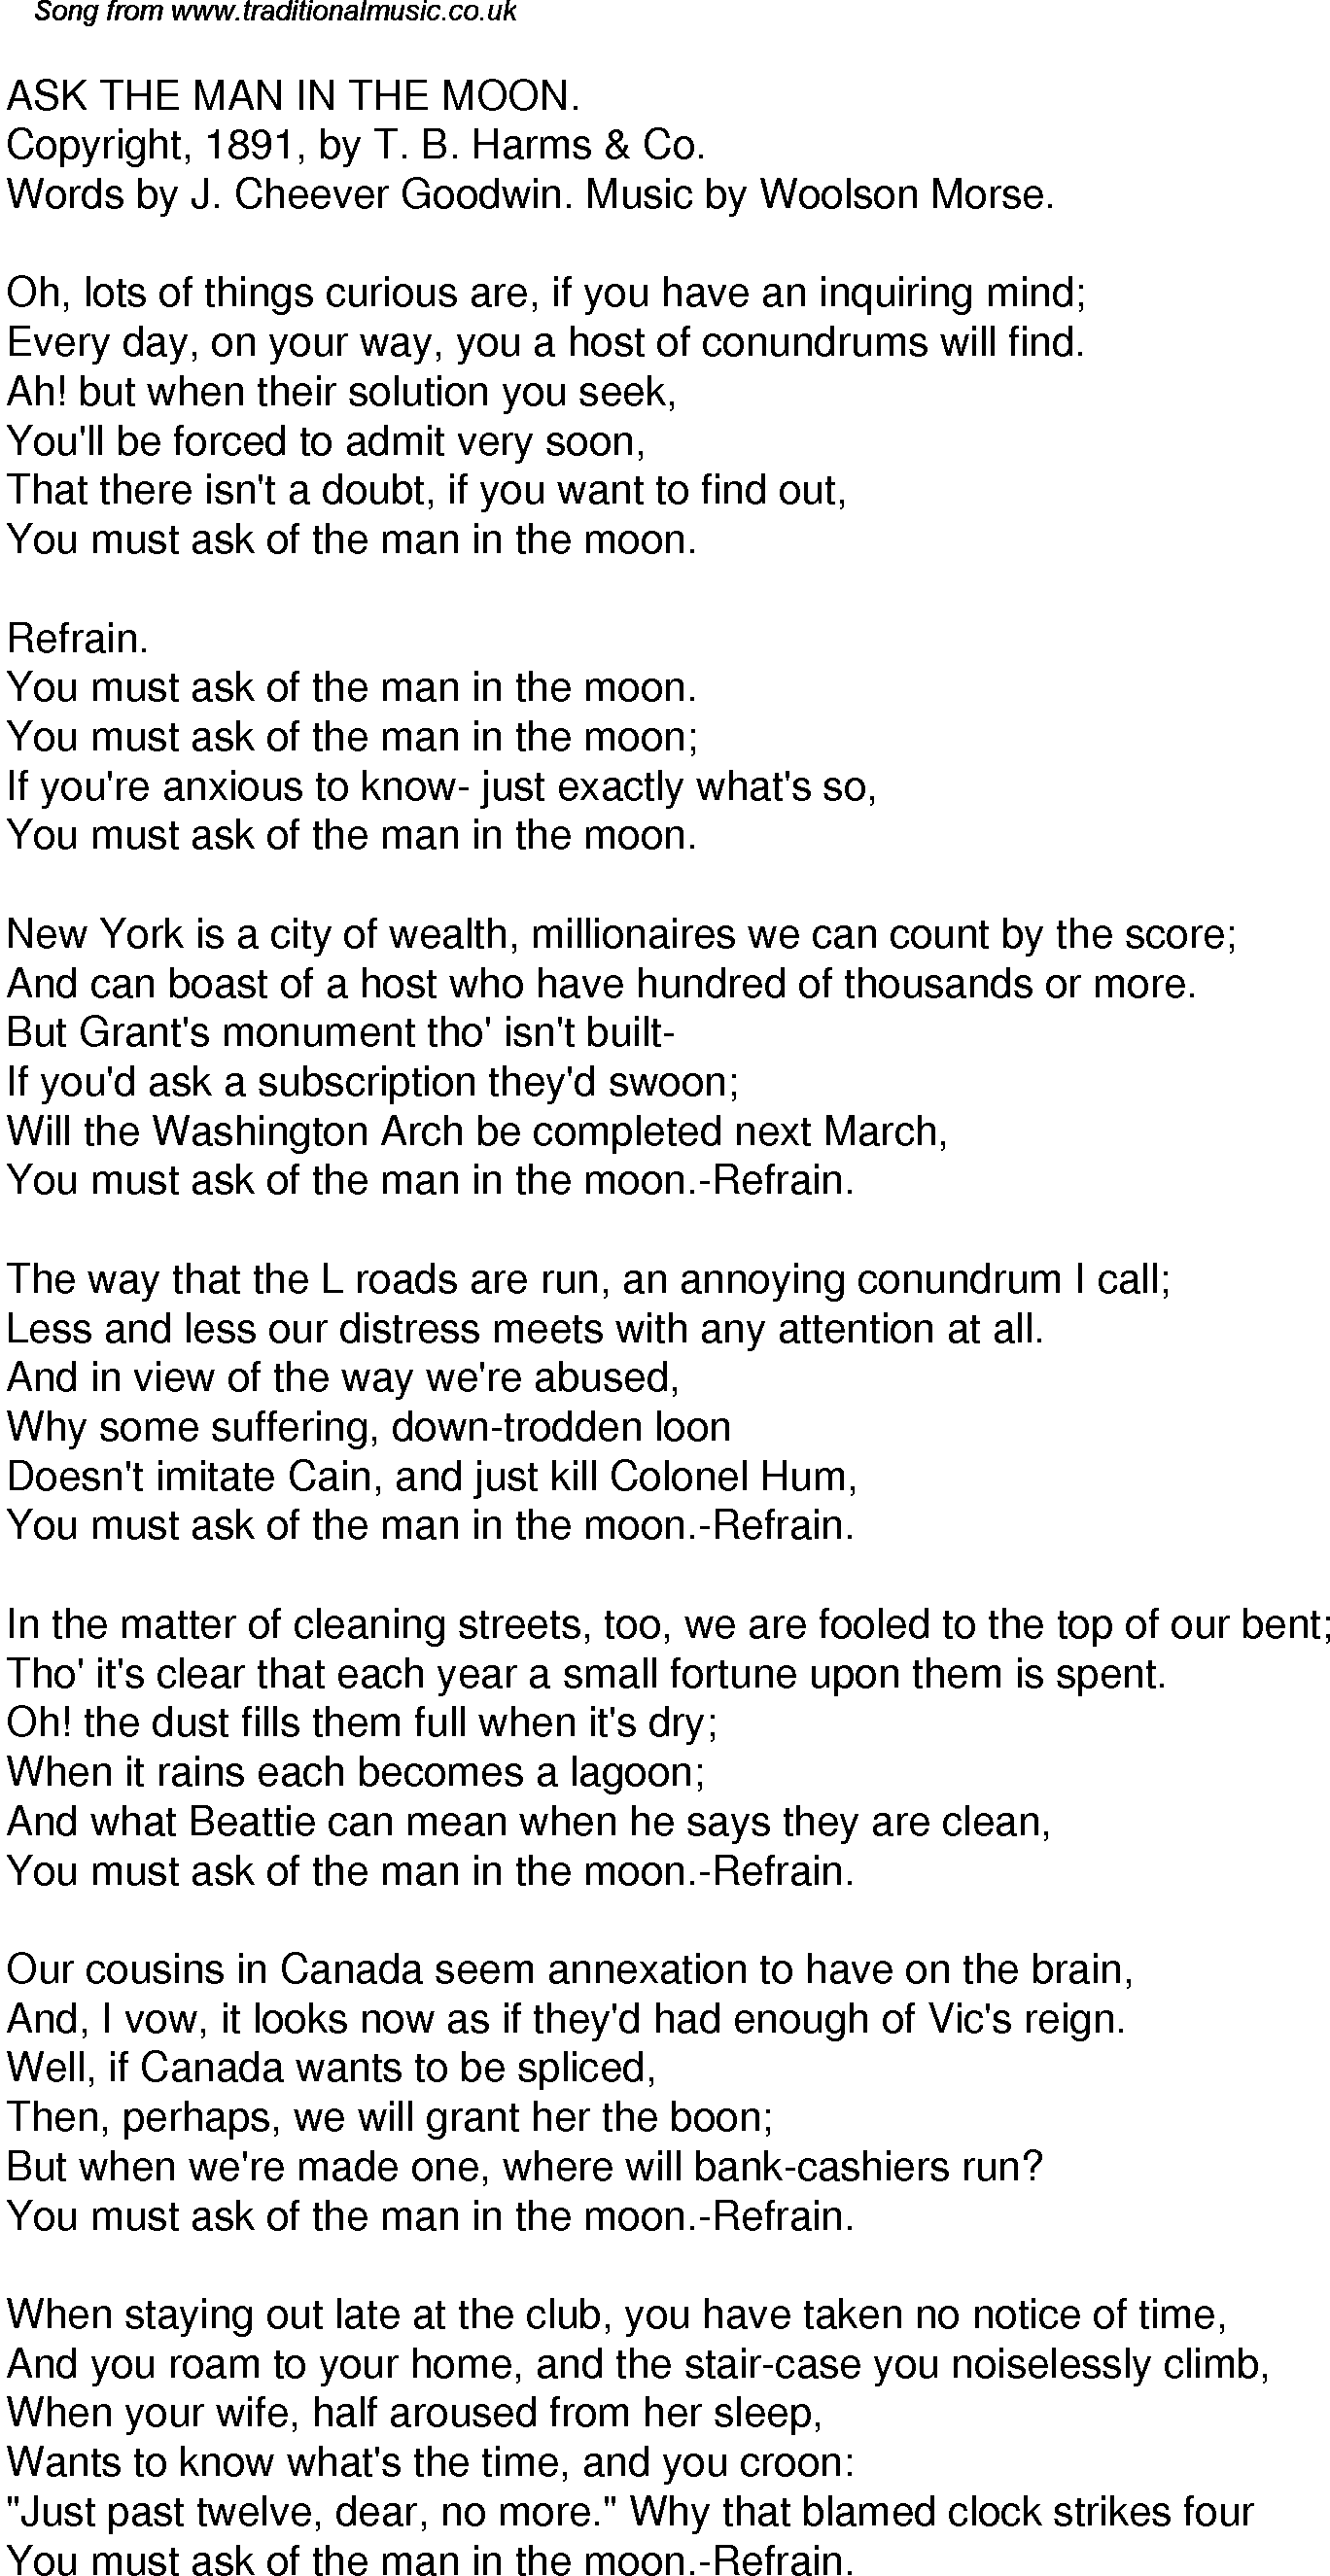 Old Time Song Lyrics for 32 Ask The Man In The Moon